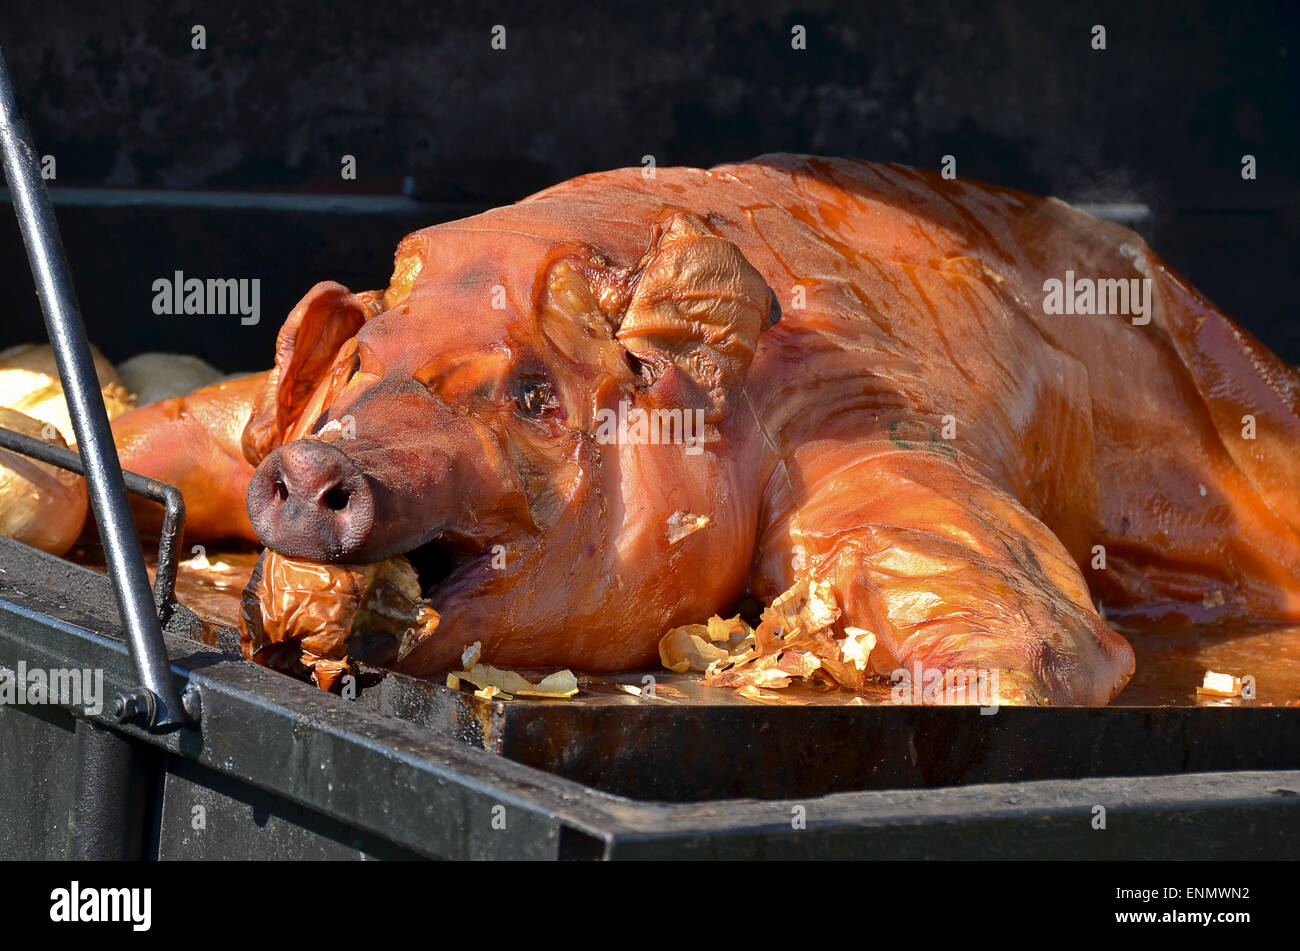 Roasting pig with apple in its mouth in roaster. Stock Photo